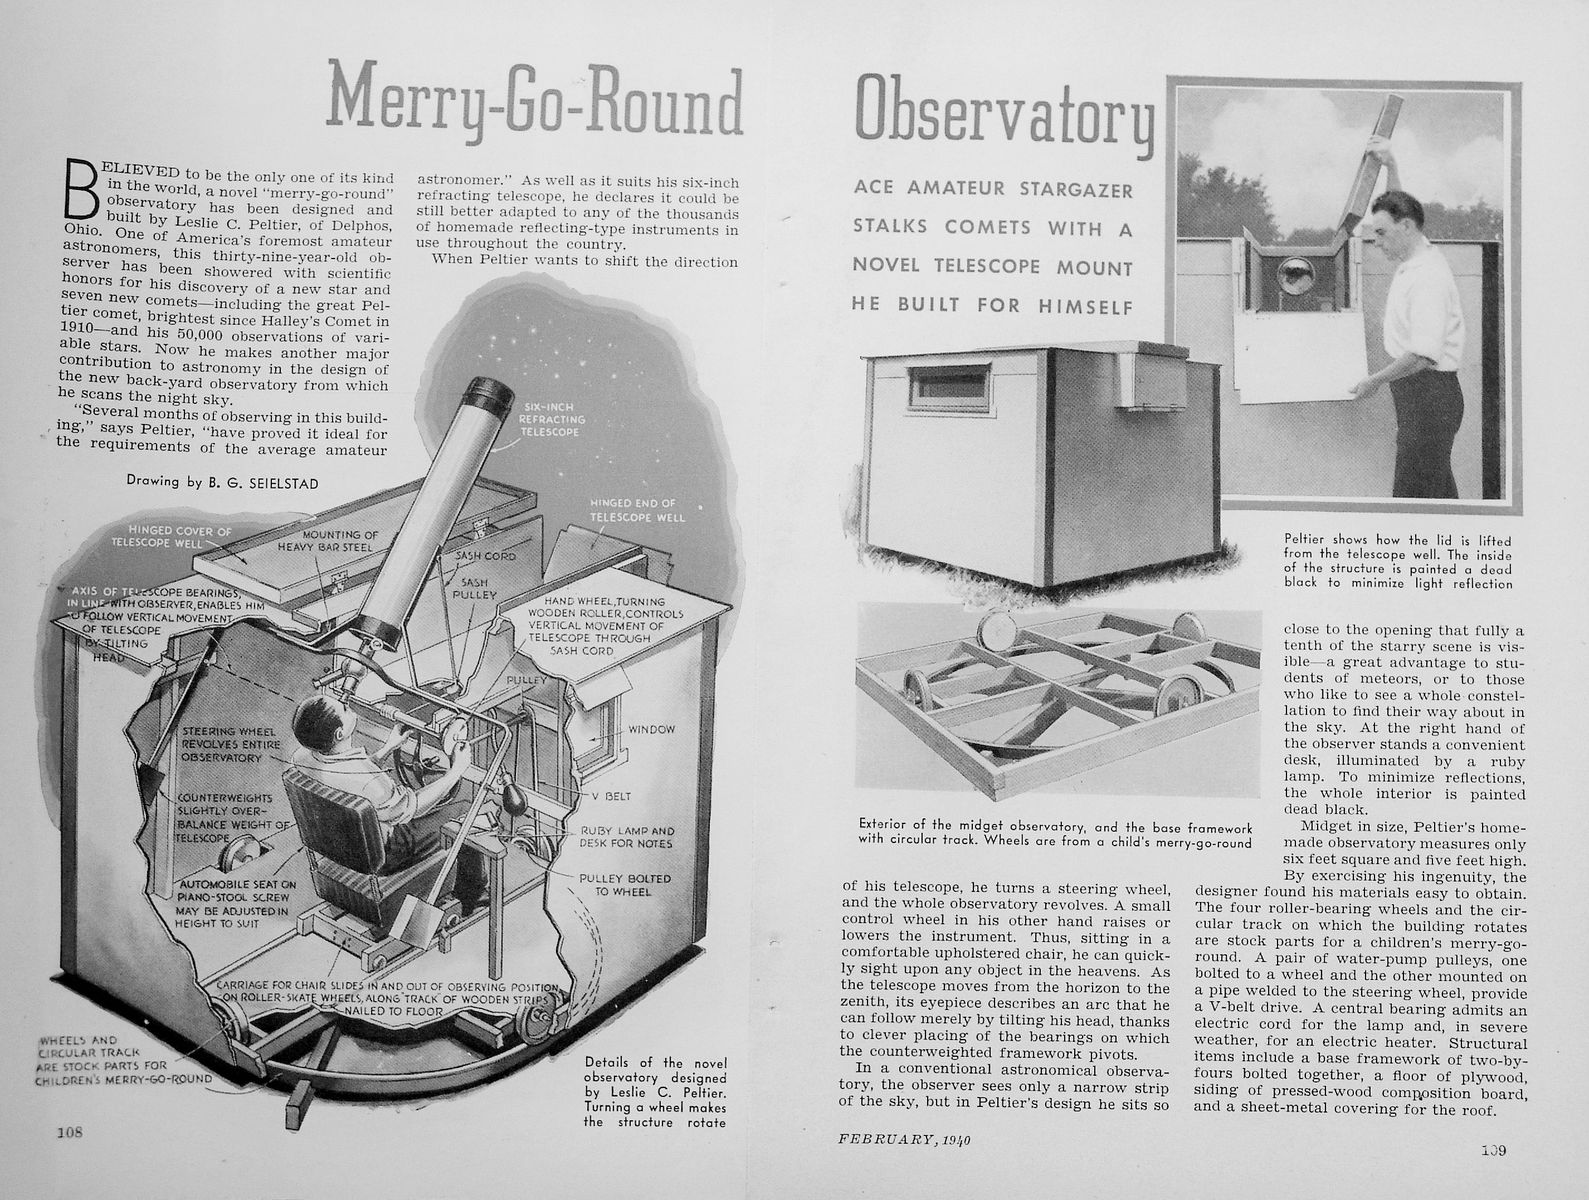 Article on Leslie Peltier's Merry-Go-Round Observatory